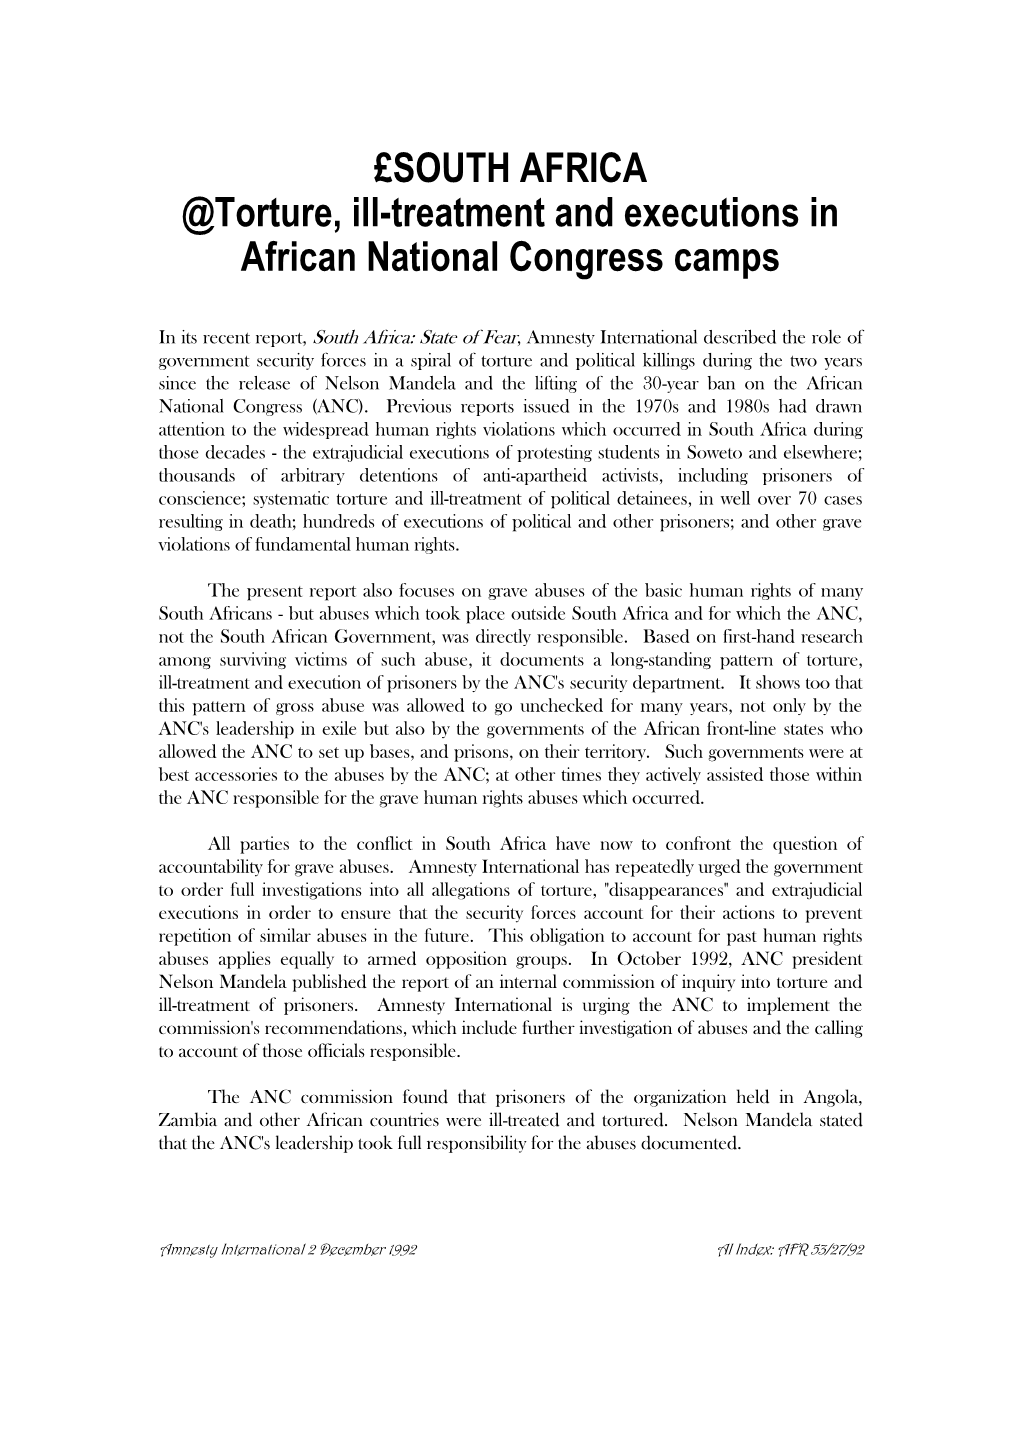 £SOUTH AFRICA @Torture, Ill-Treatment and Executions in African National Congress Camps